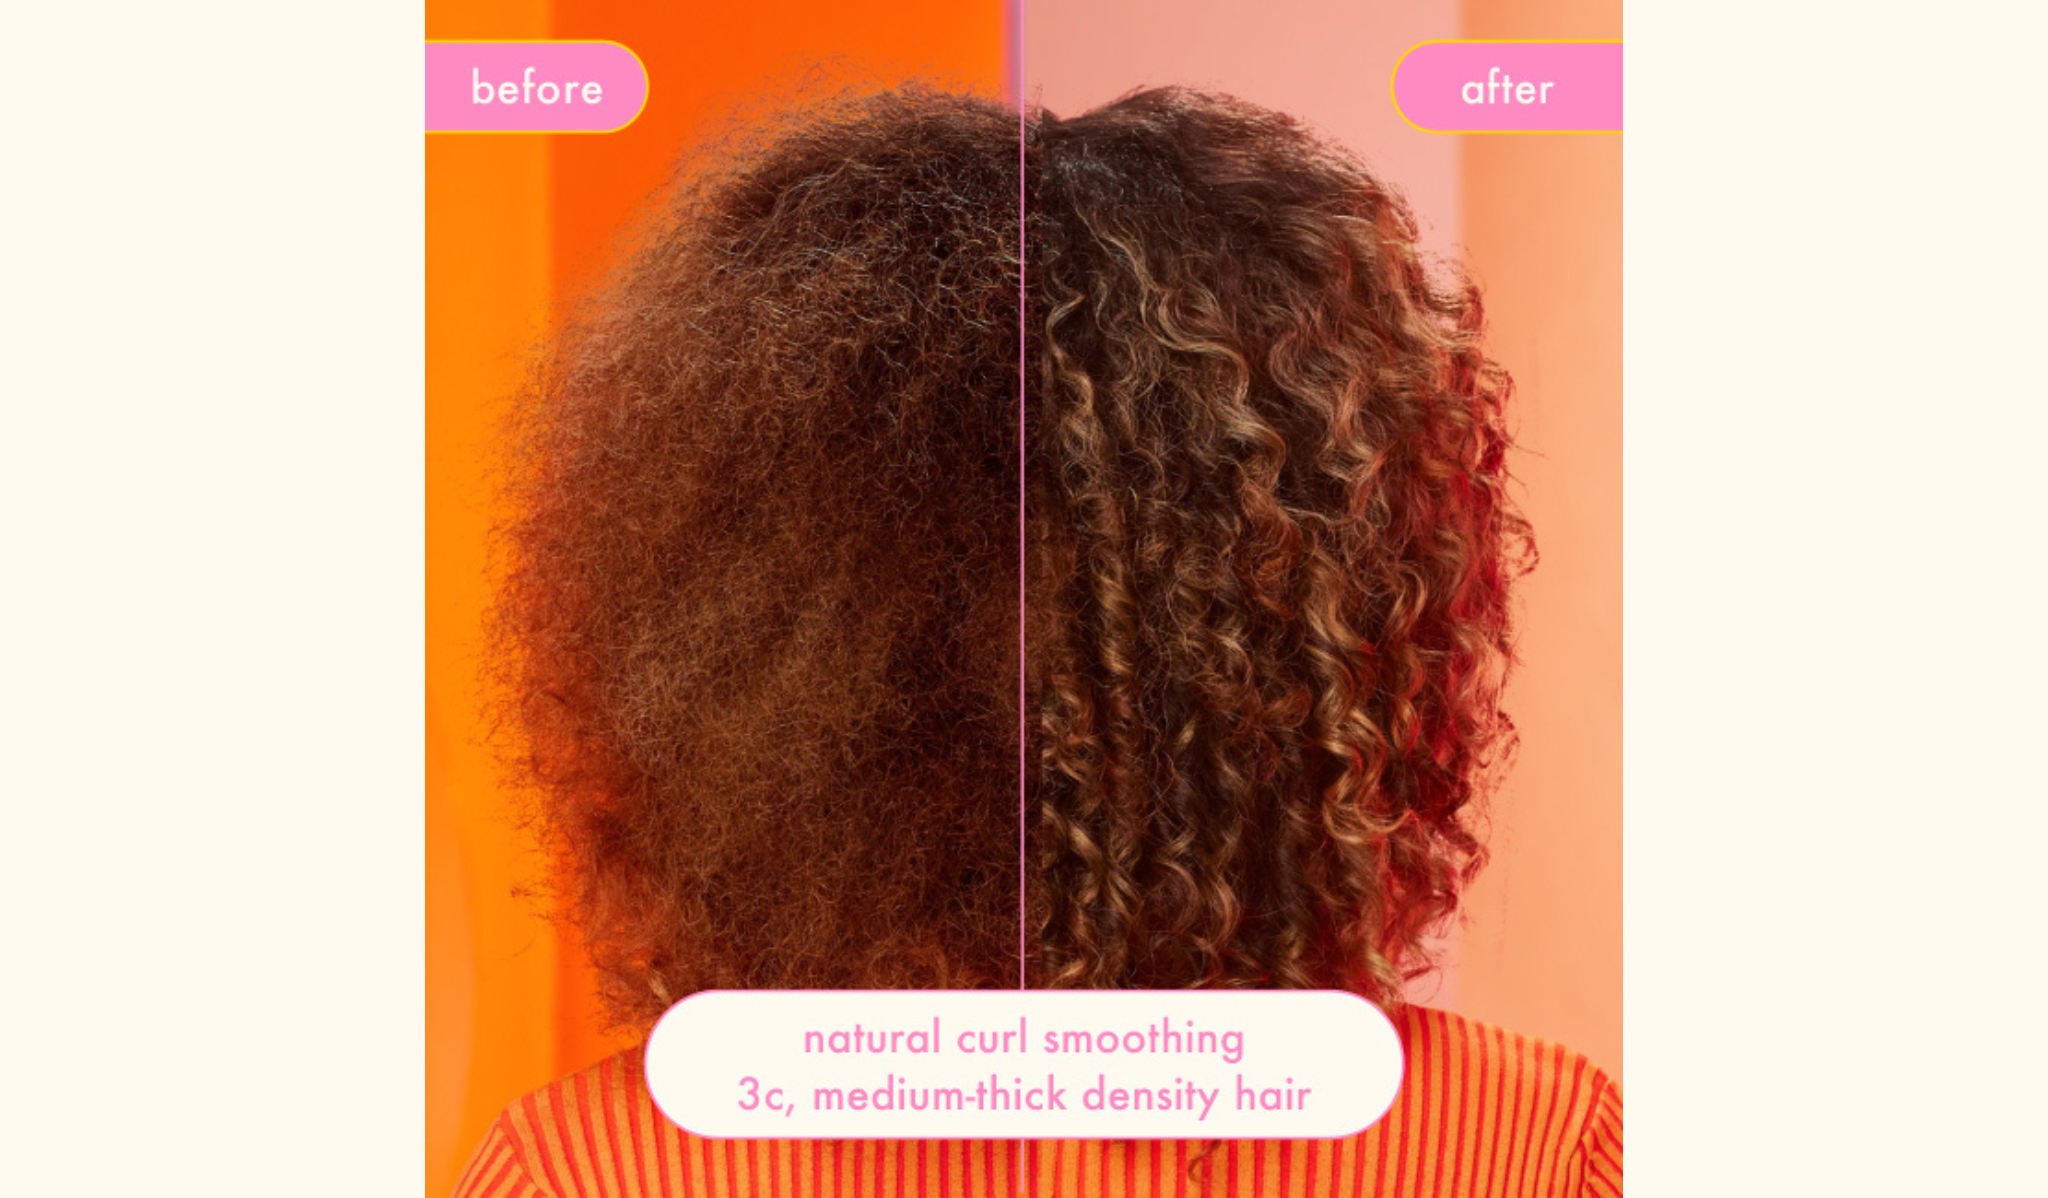 hair before and after using smooth over frizz-fighting treatment